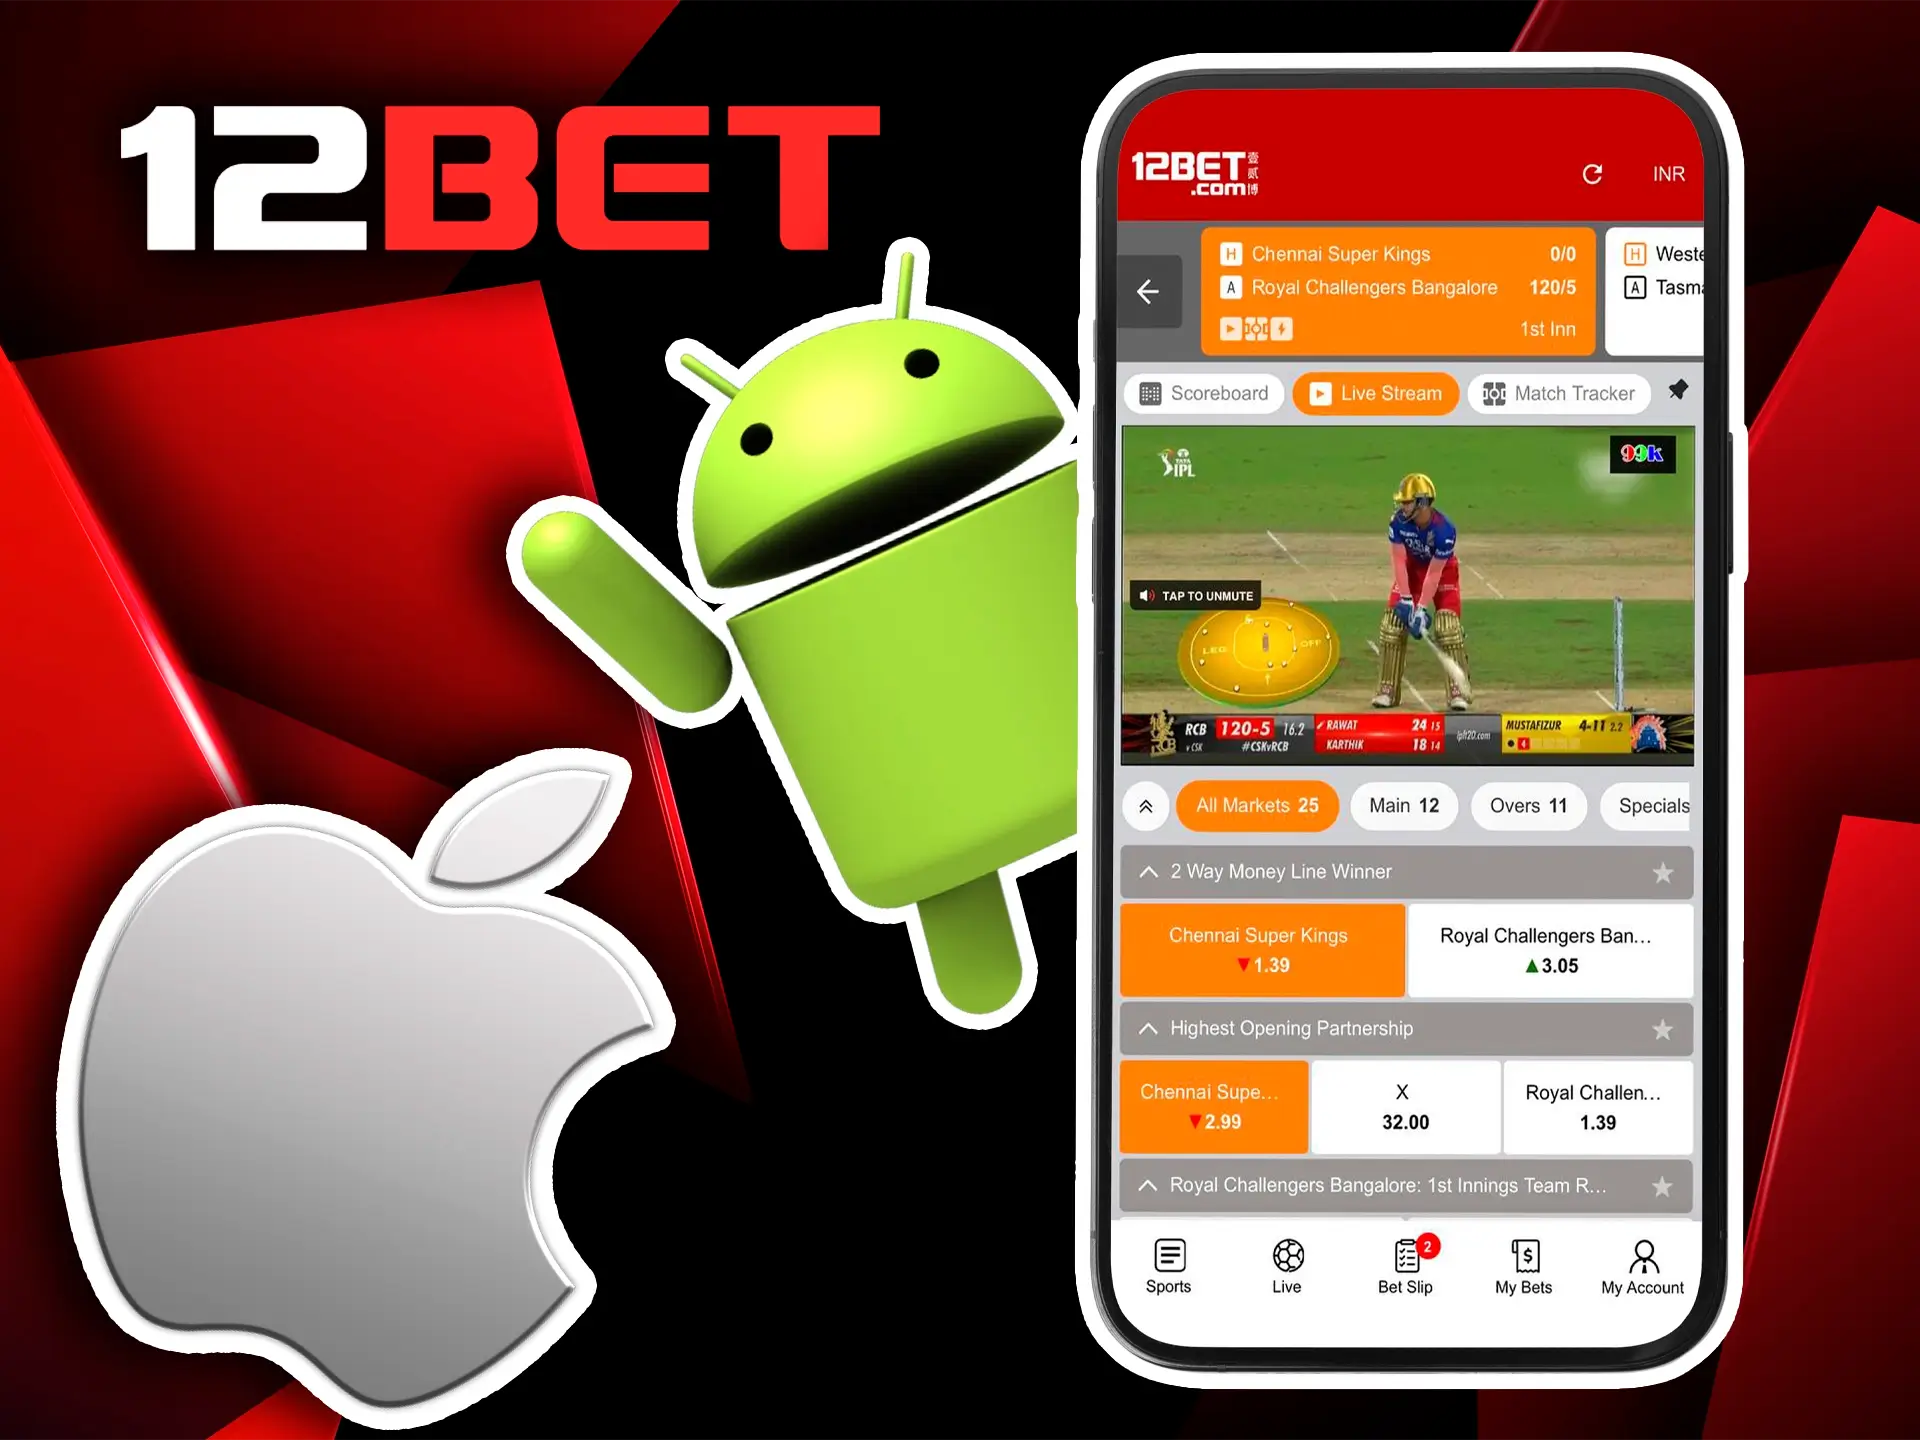 Use the 12Bet mobile app for iOS and Android to be able to place an instant bet on the IPL from anywhere.